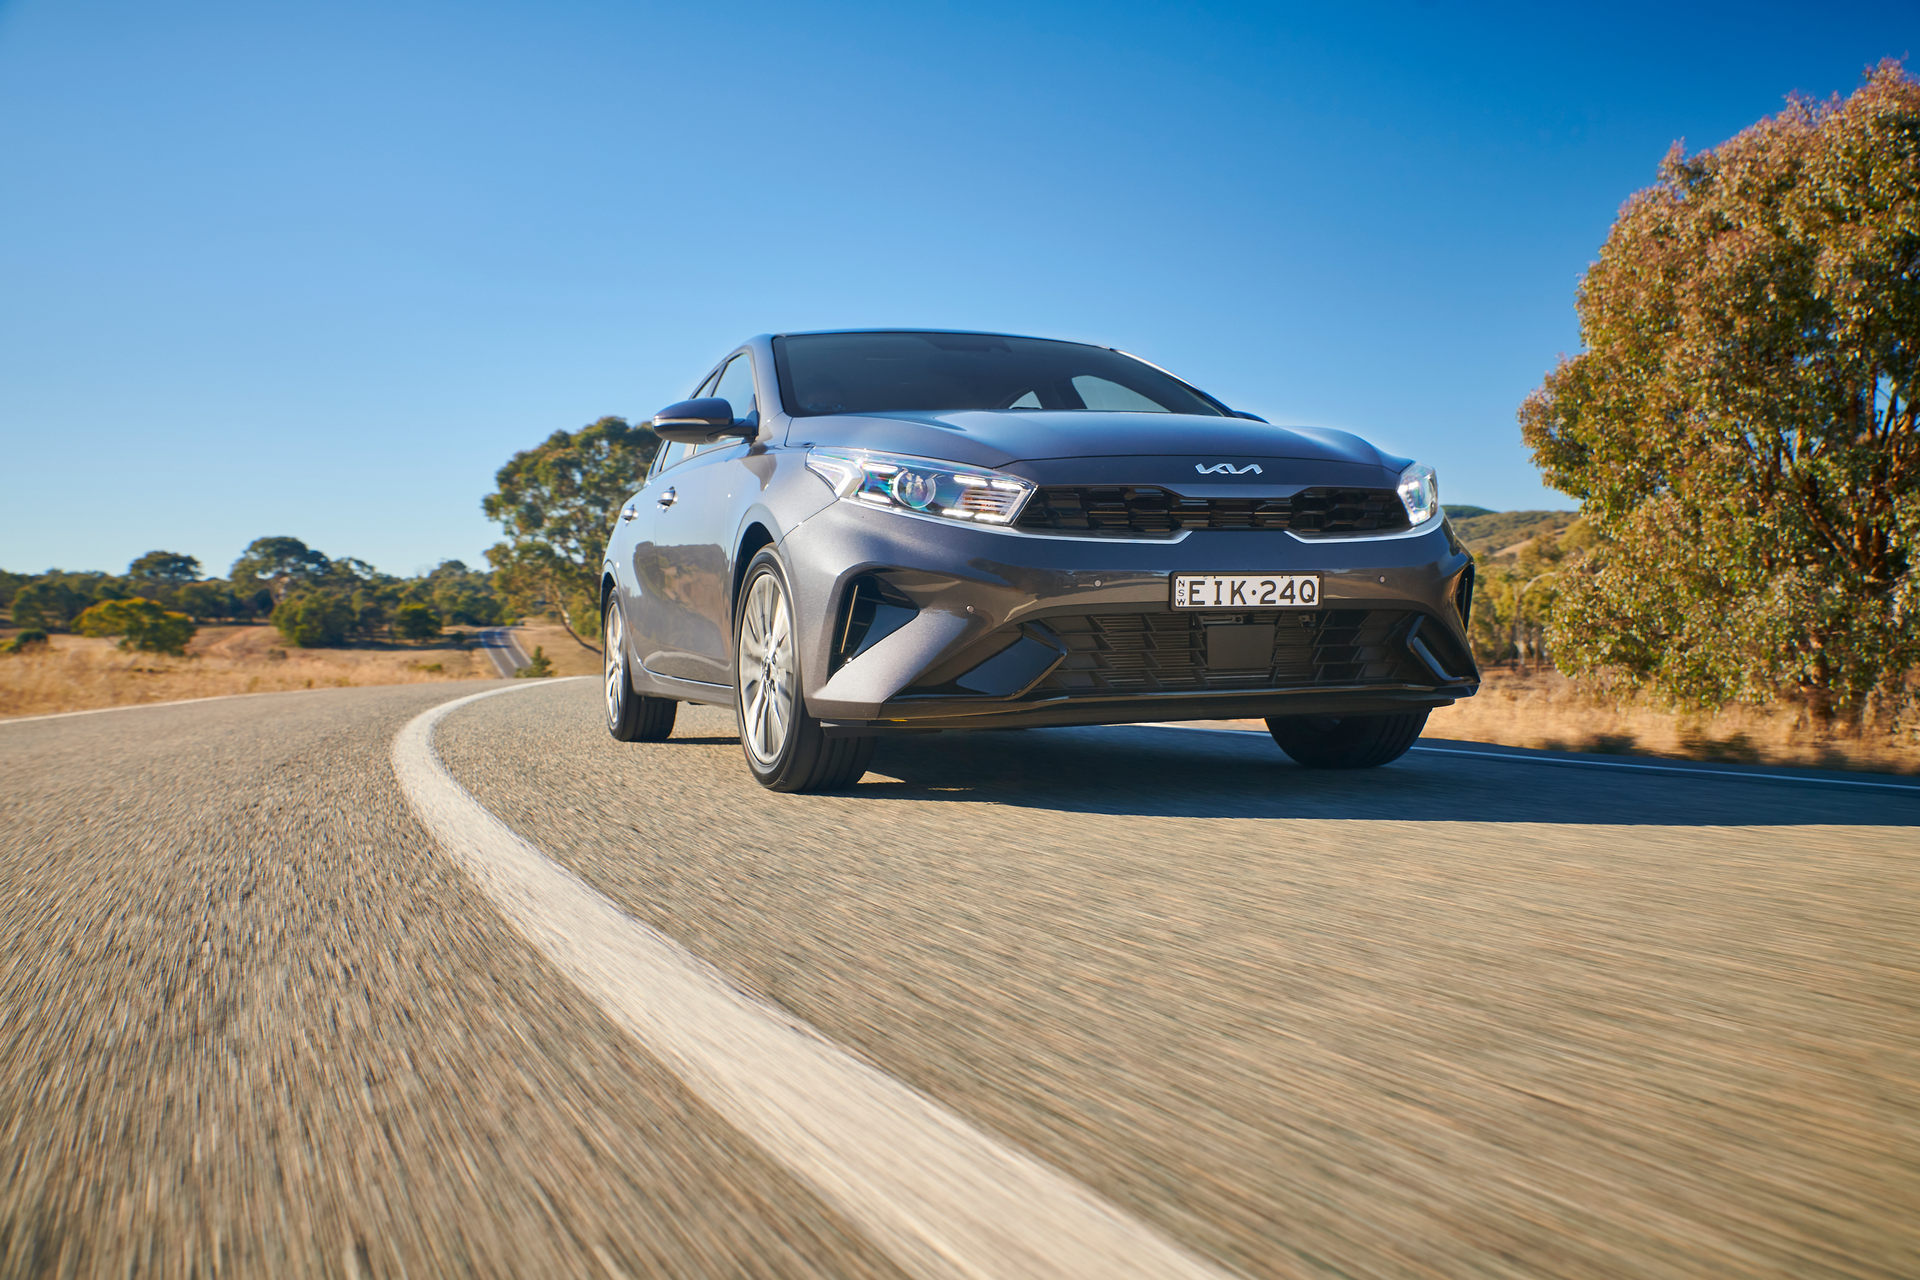 Facelifted 2022 Kia Cerato Launches In Australia From AU$25,990 | Carscoops